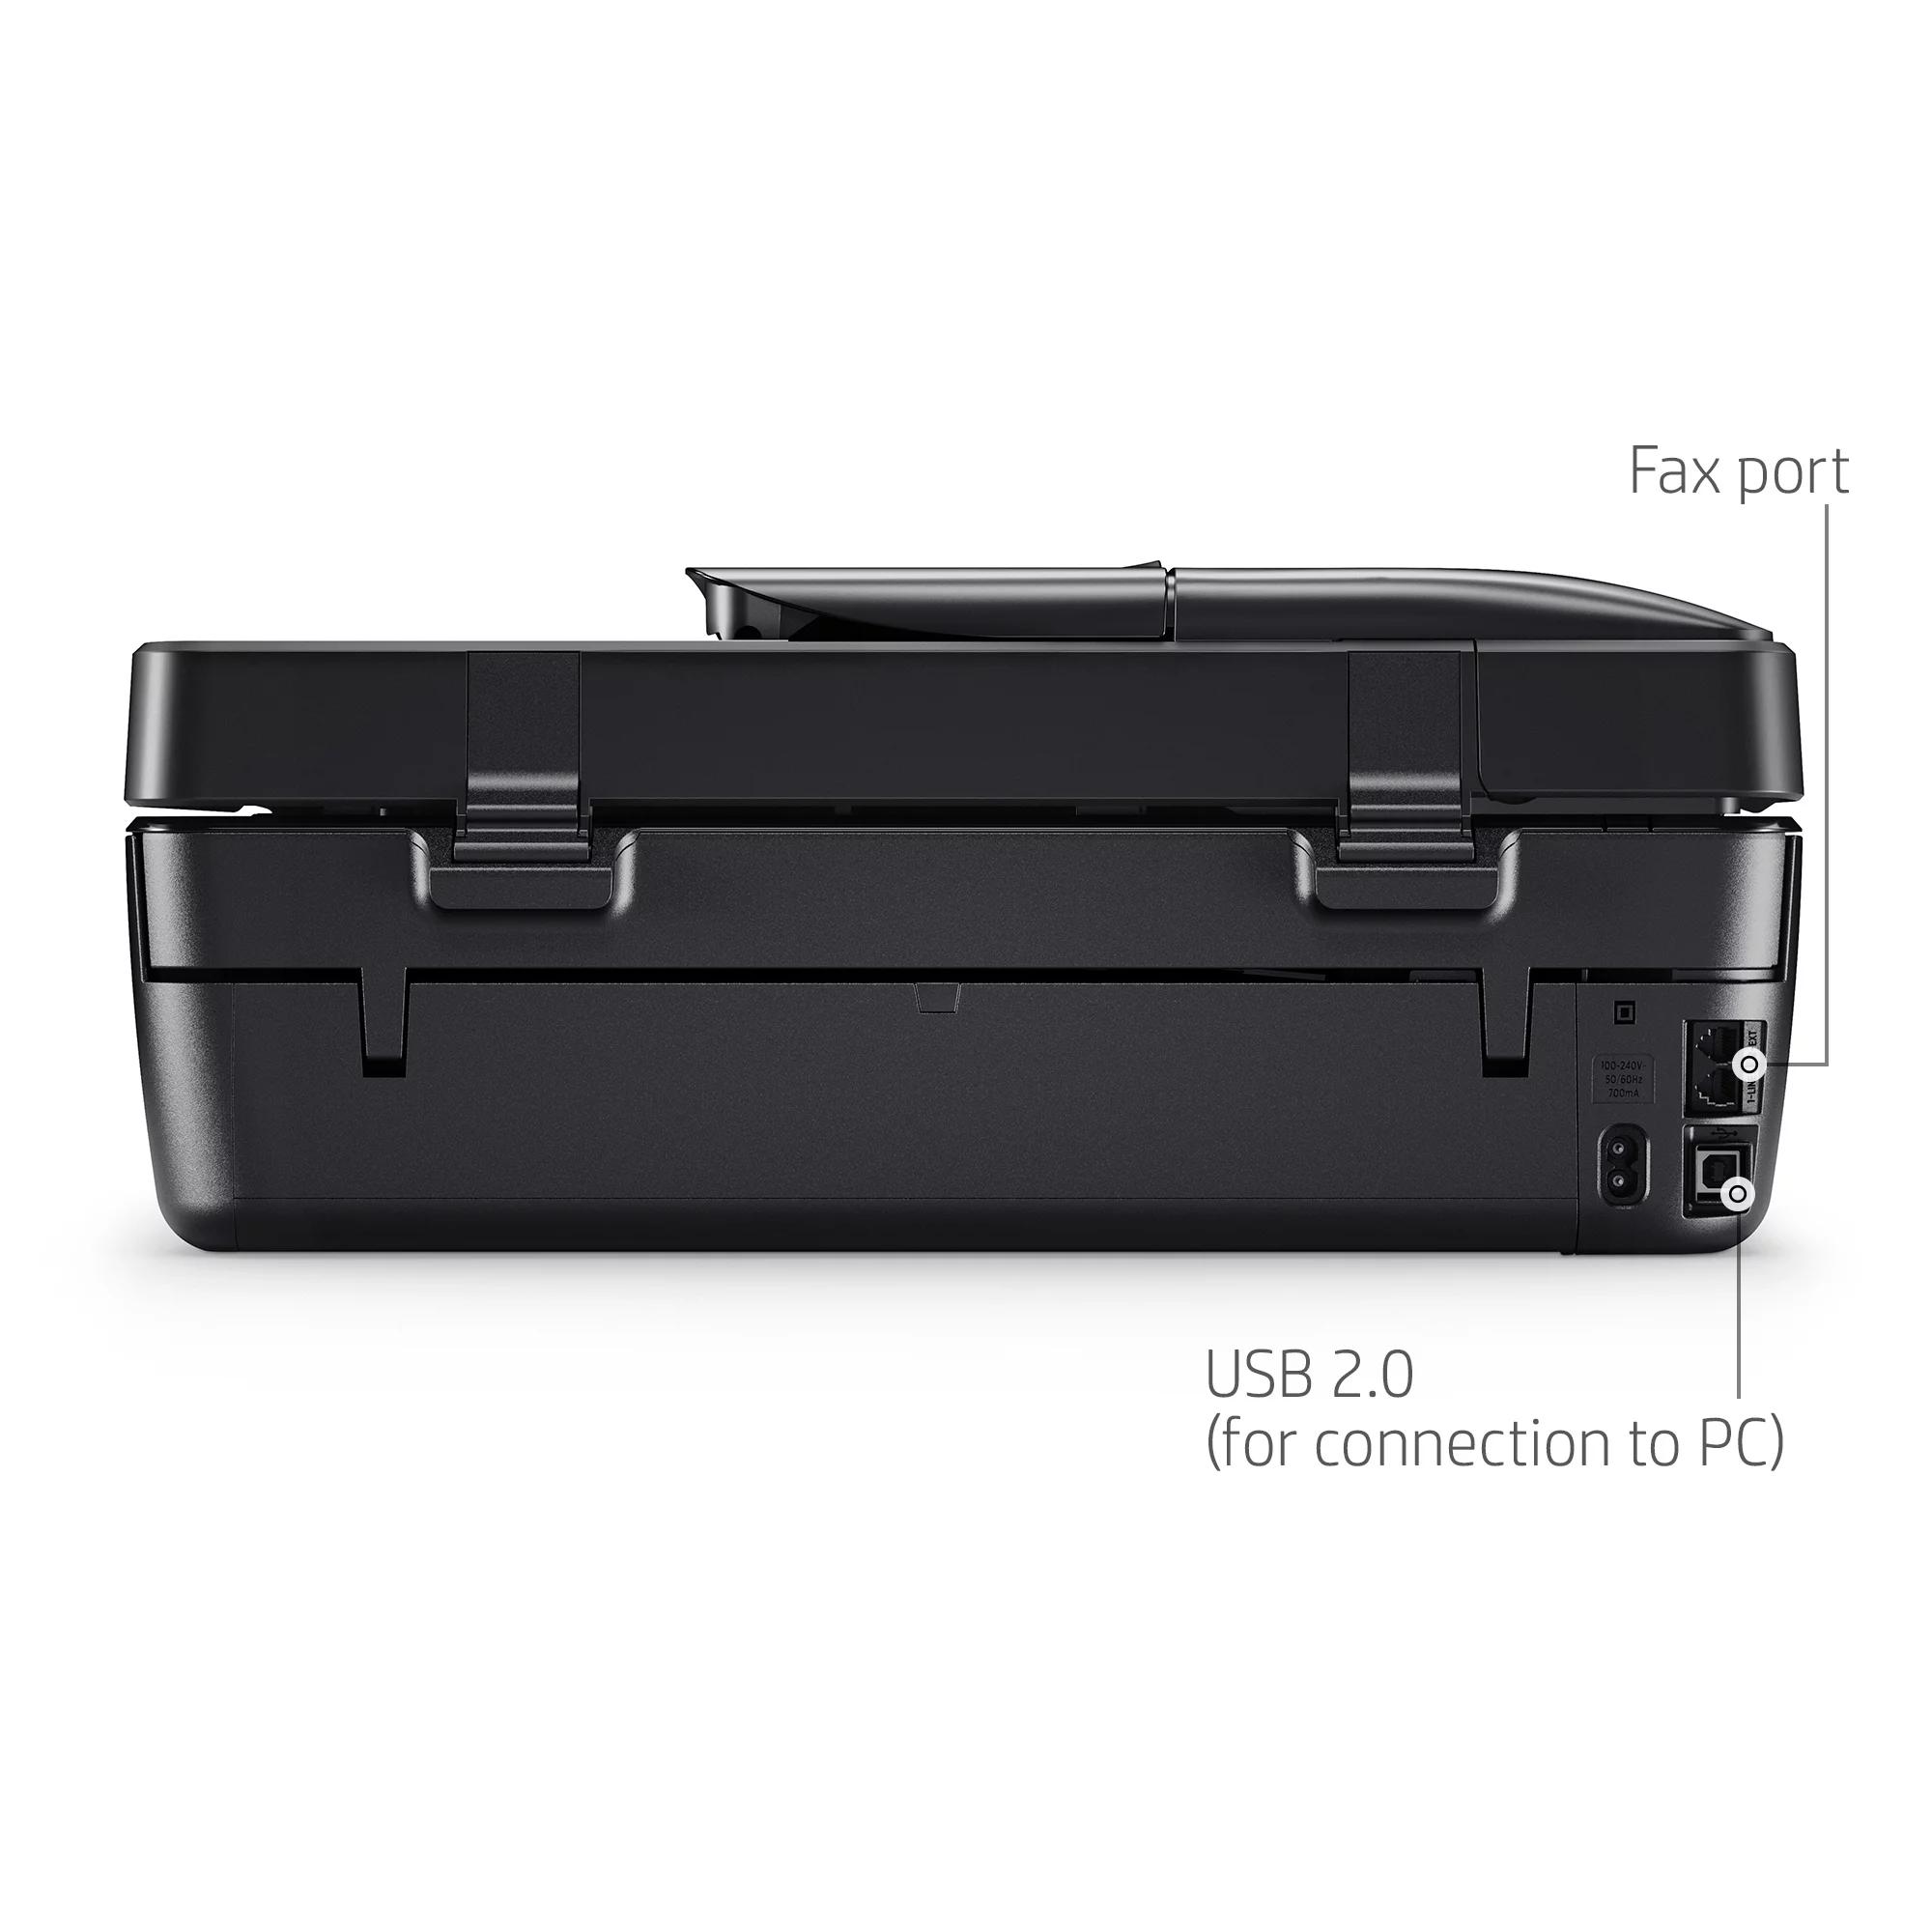 port 5222 hewlett packard - Which port do I use for my HP printer